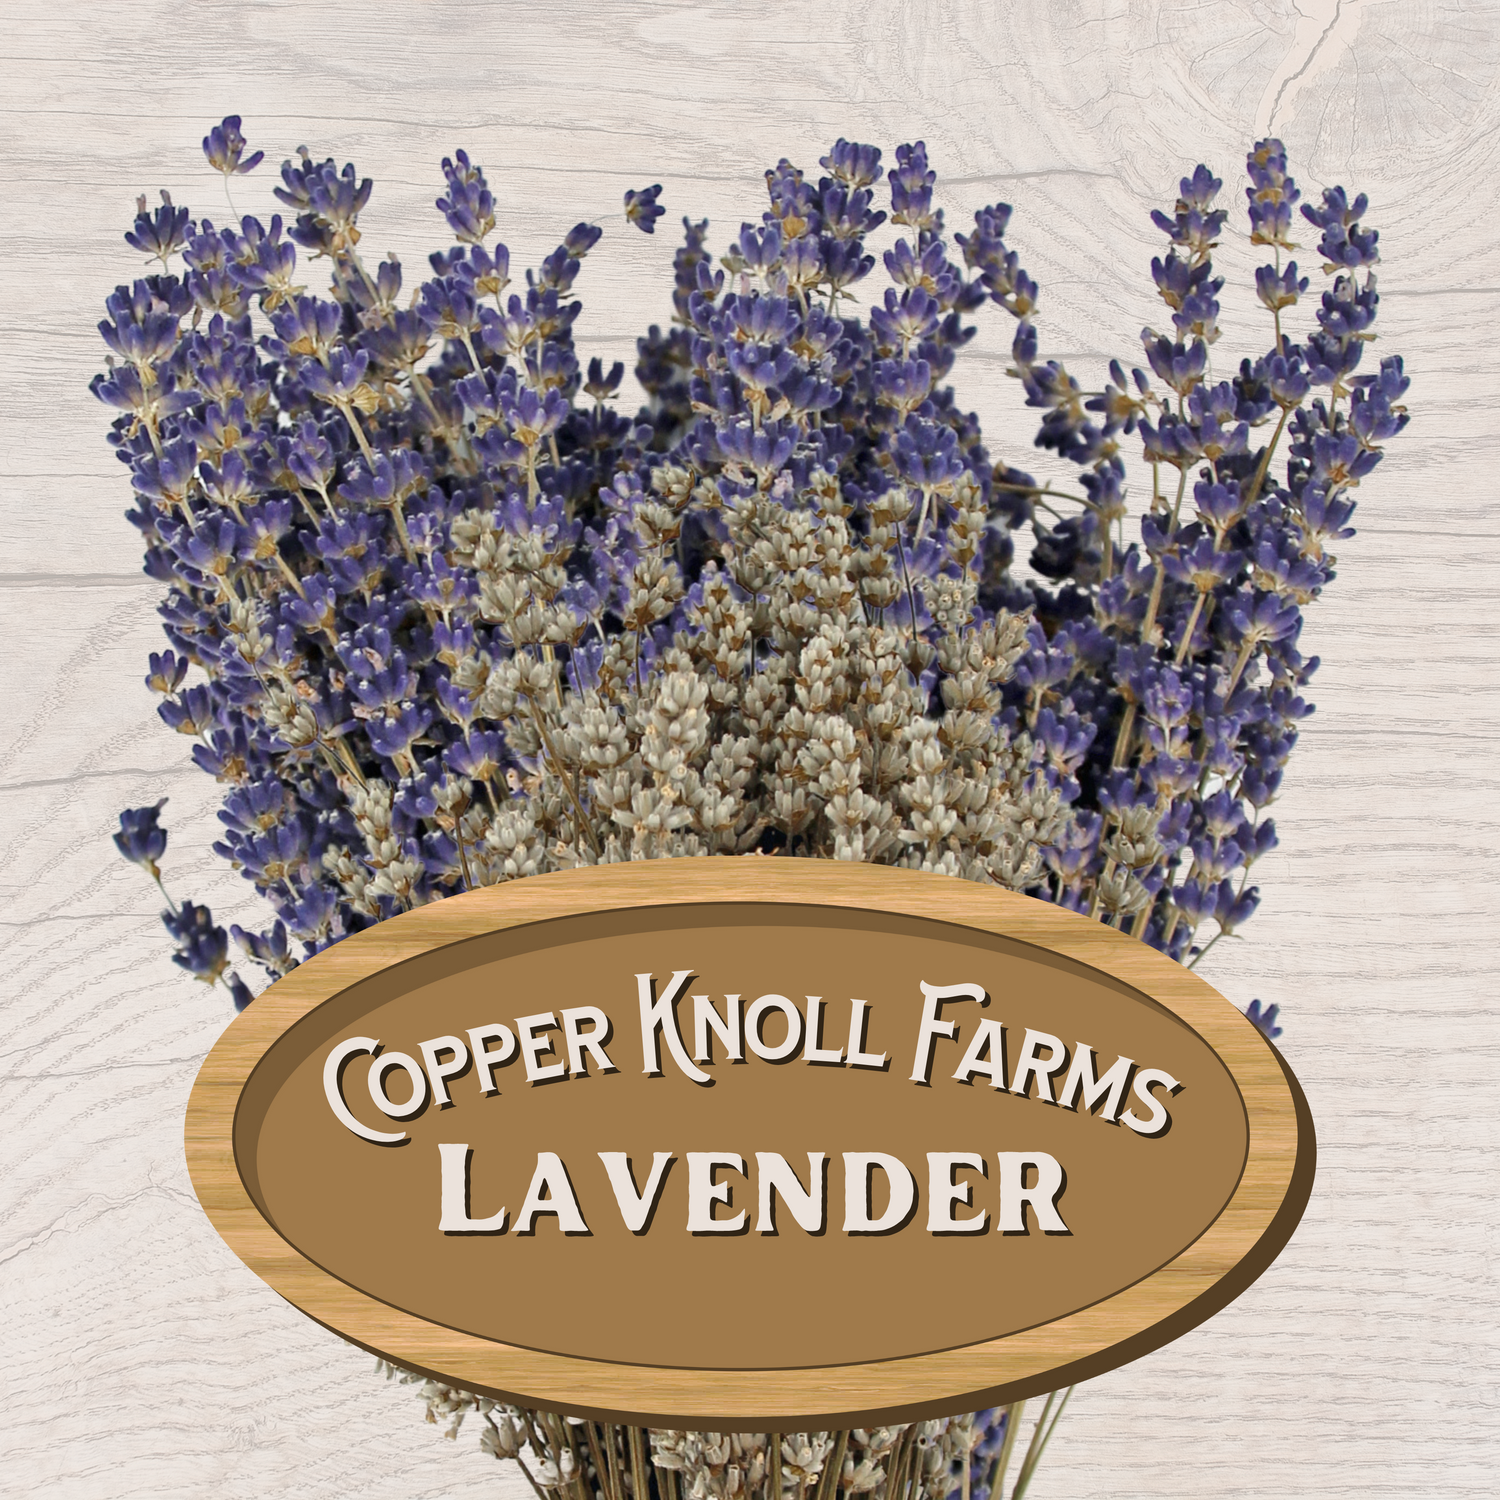 Introducing: Copper Knoll Farms Lavender